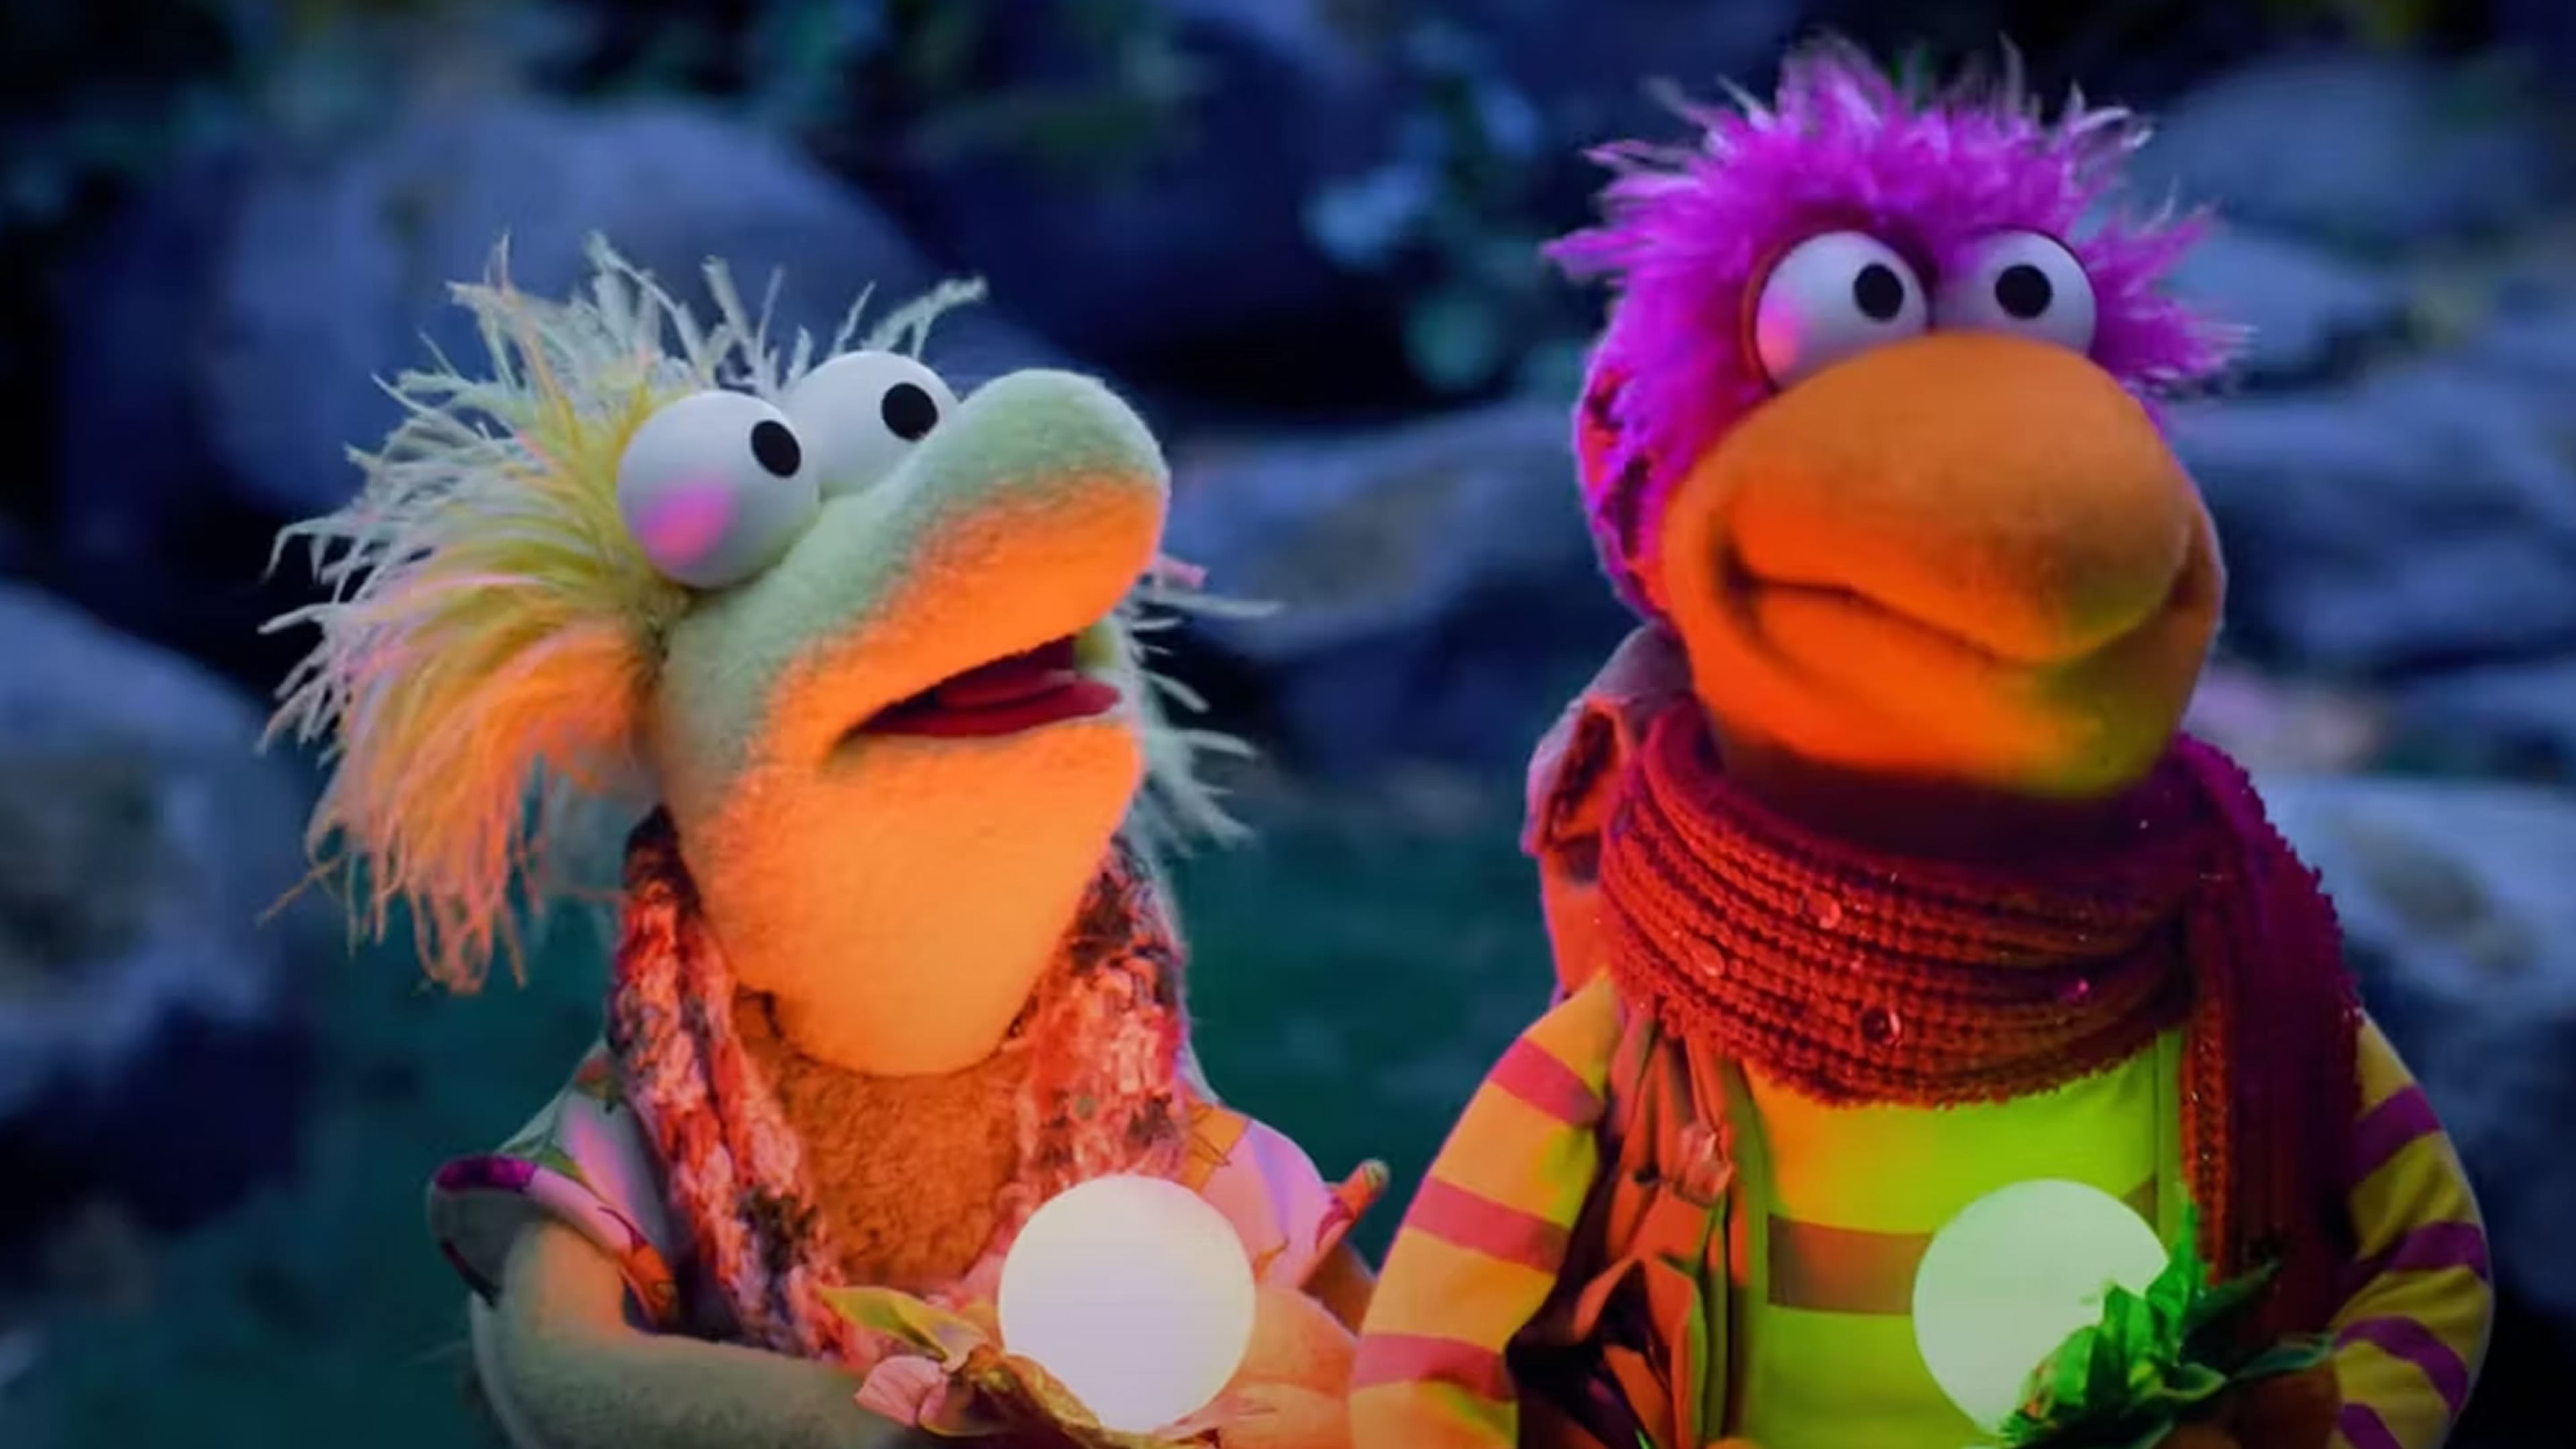 Fraggle Rock: Back to the Rock: Night of the Lights